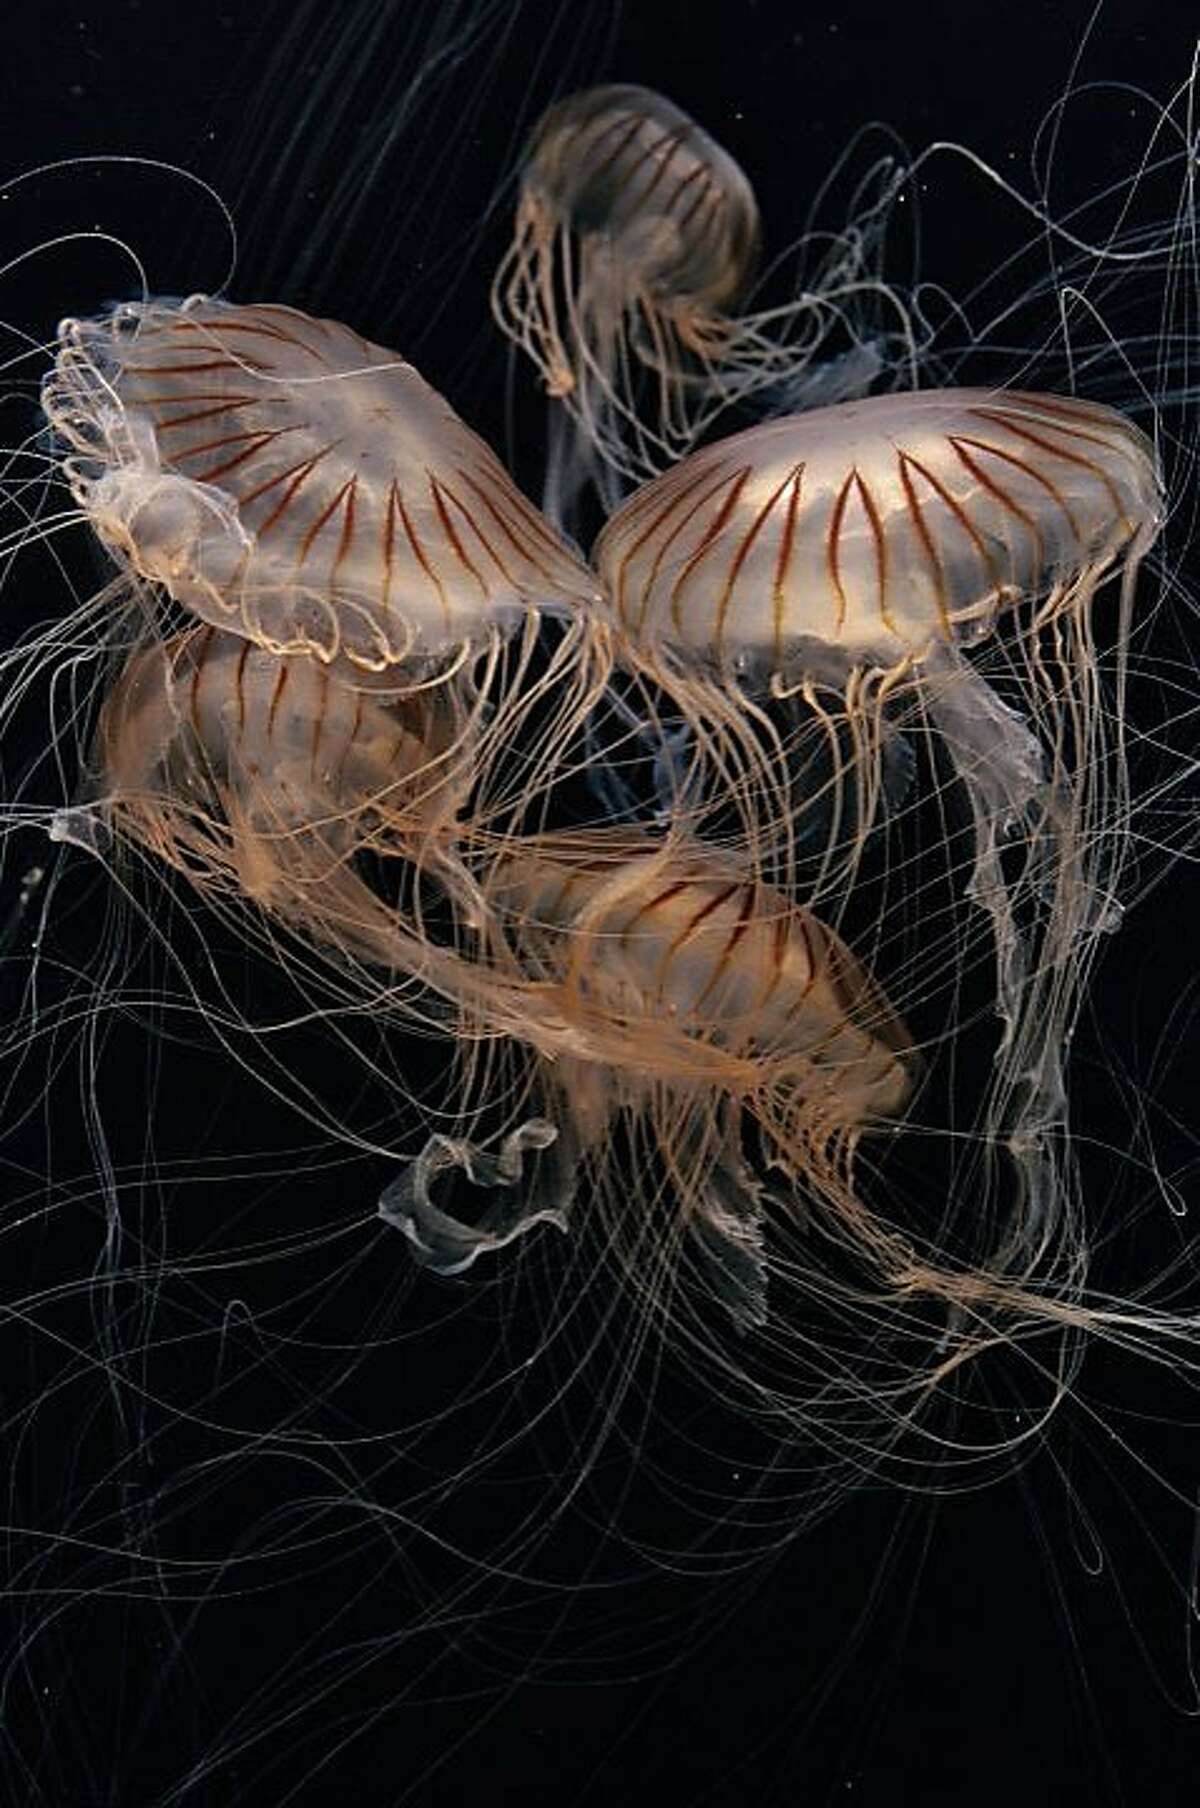 Japanese sea nettles, Chrysaora pacifica, will be featured in "The Jellies Experience" exhibition, opening at the Monterey Bay Aquarium on March 31, 2012.